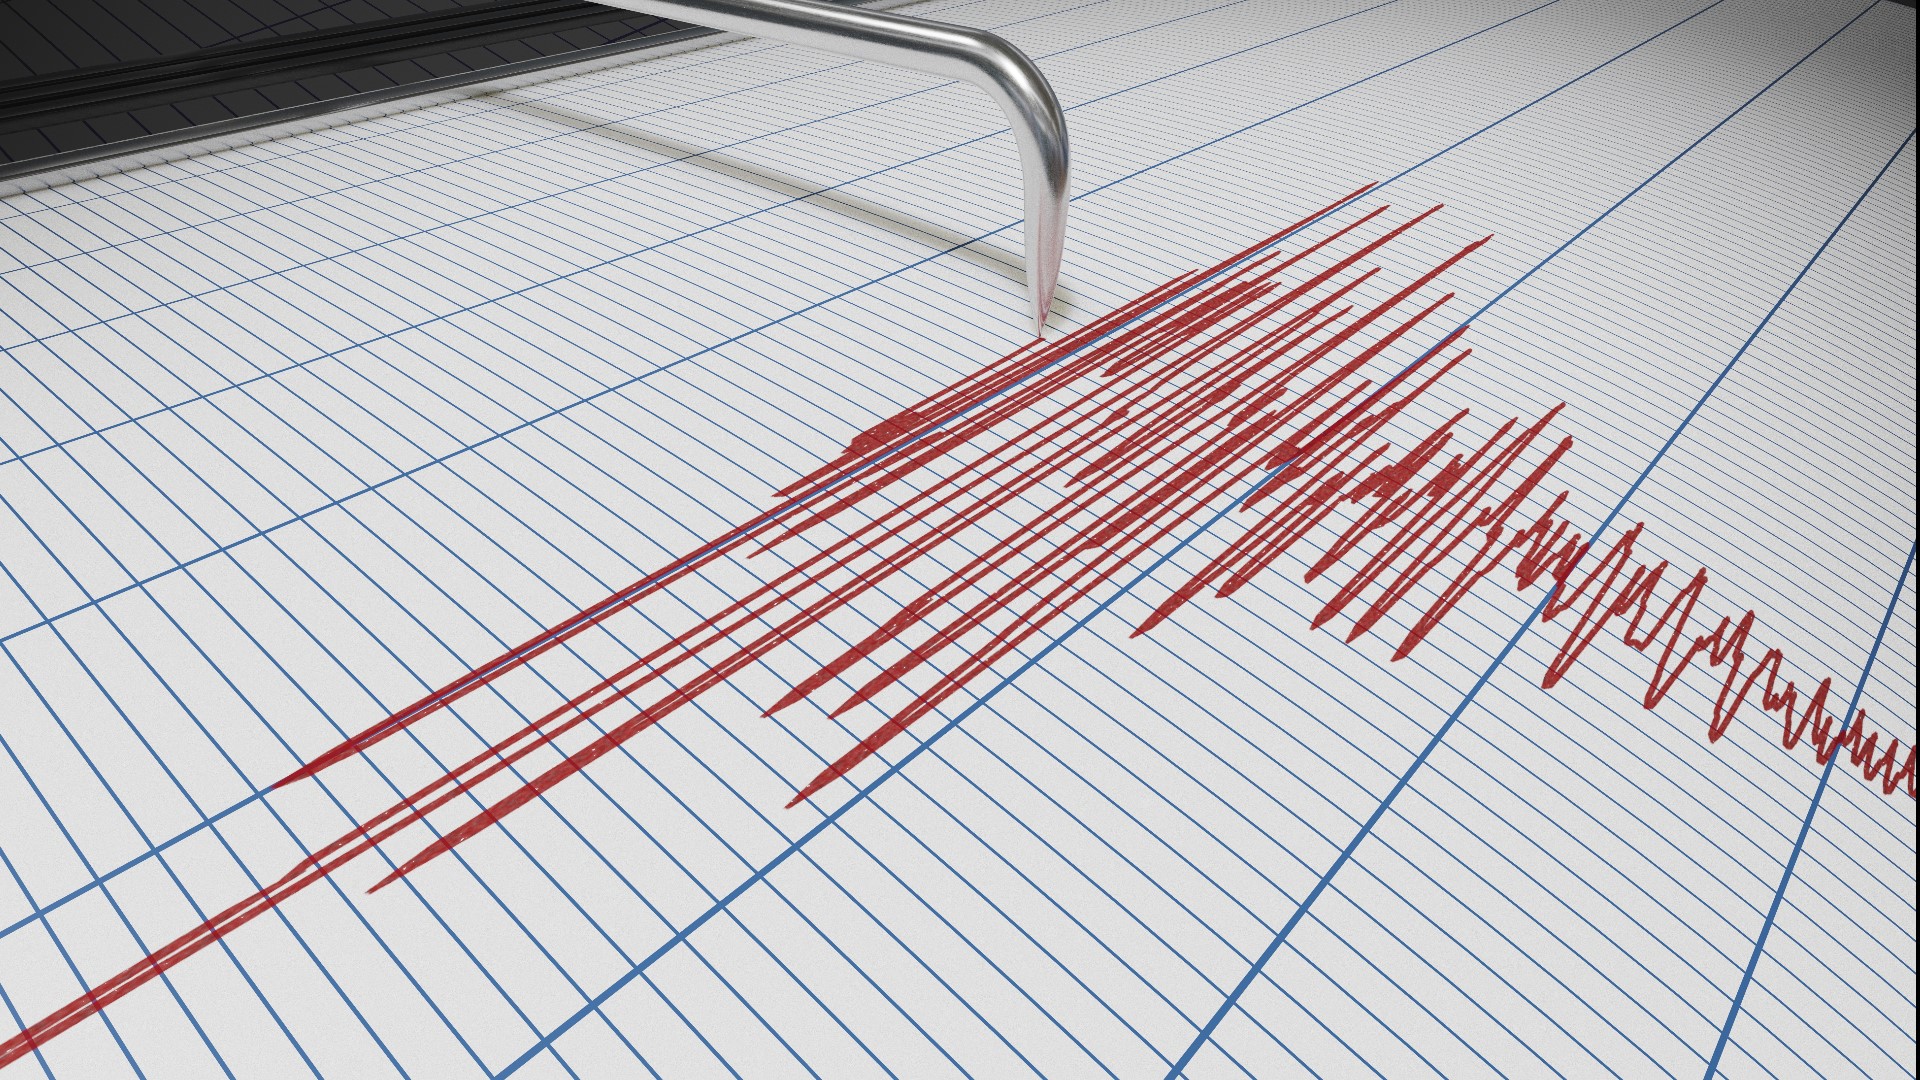 A top seismologist says the earthquake happened in the East Bay and recorded a 4.5 magnitude. The earthquake was felt in Sacramento, Vacaville, and many other places